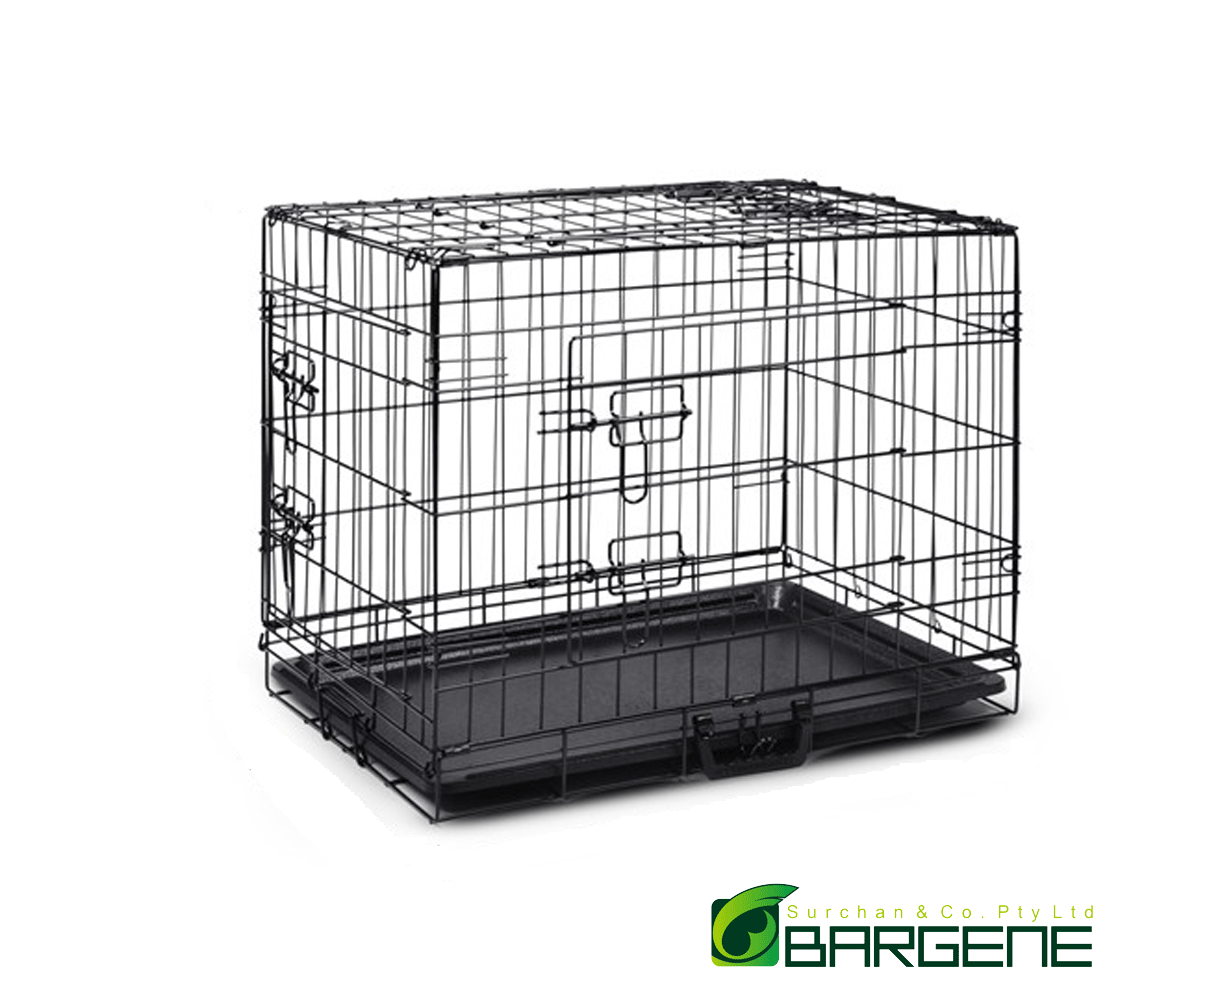 30" Portable Pet Dog Cage Collapsible Metal Crate Kennel